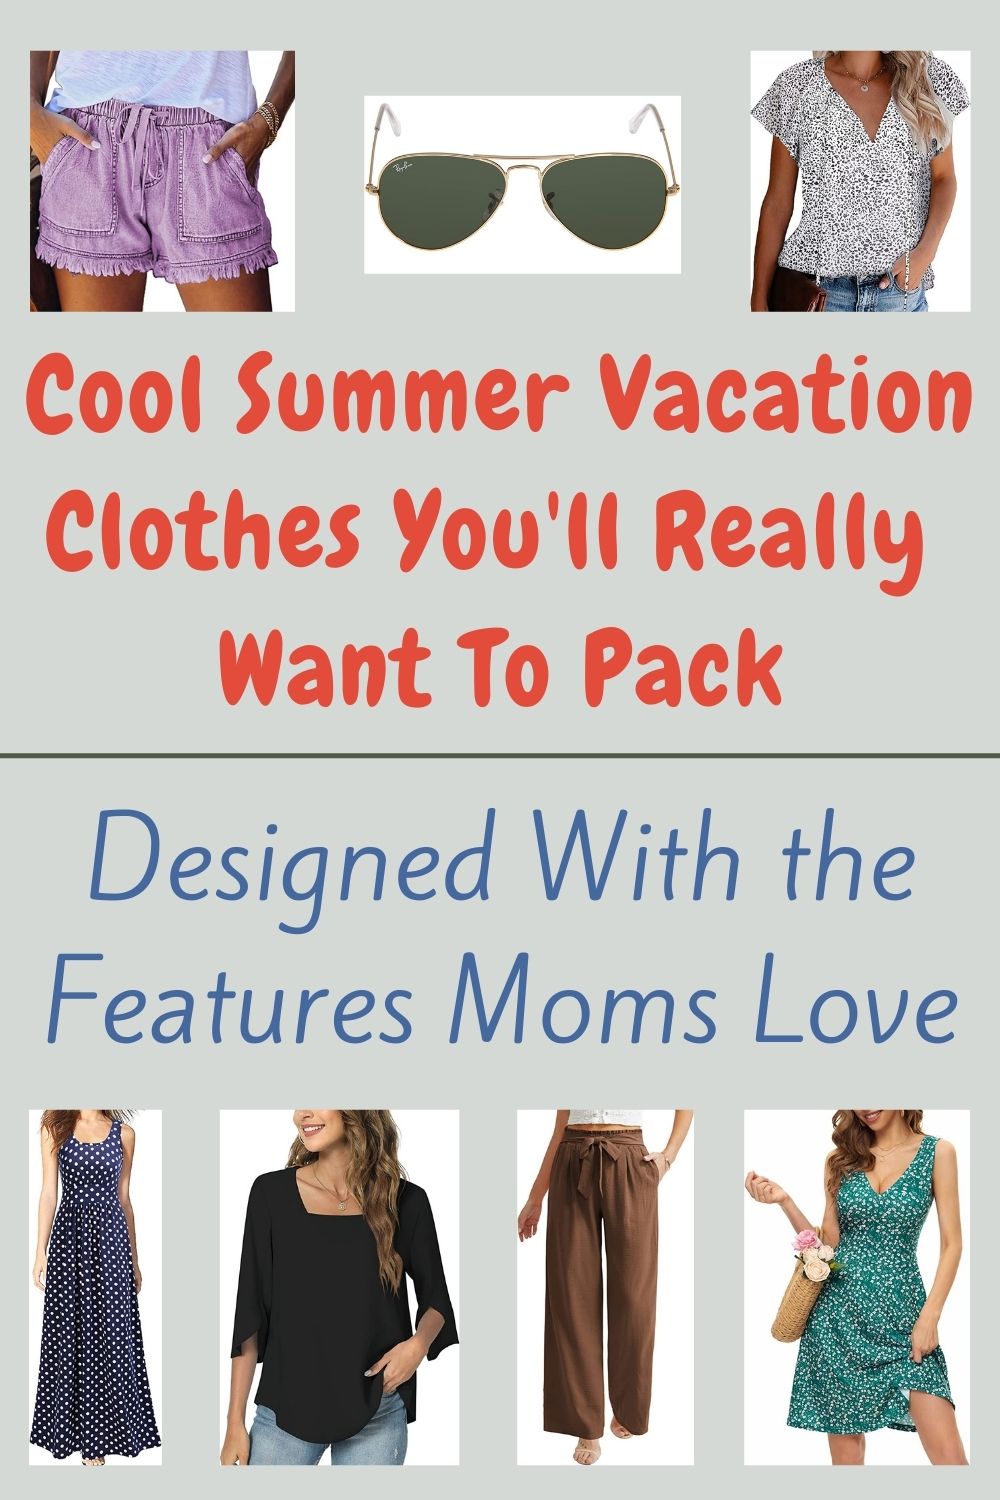 cool summer vacation clothes you'll love to wear everywhere because they look great and have the practical details moms love.